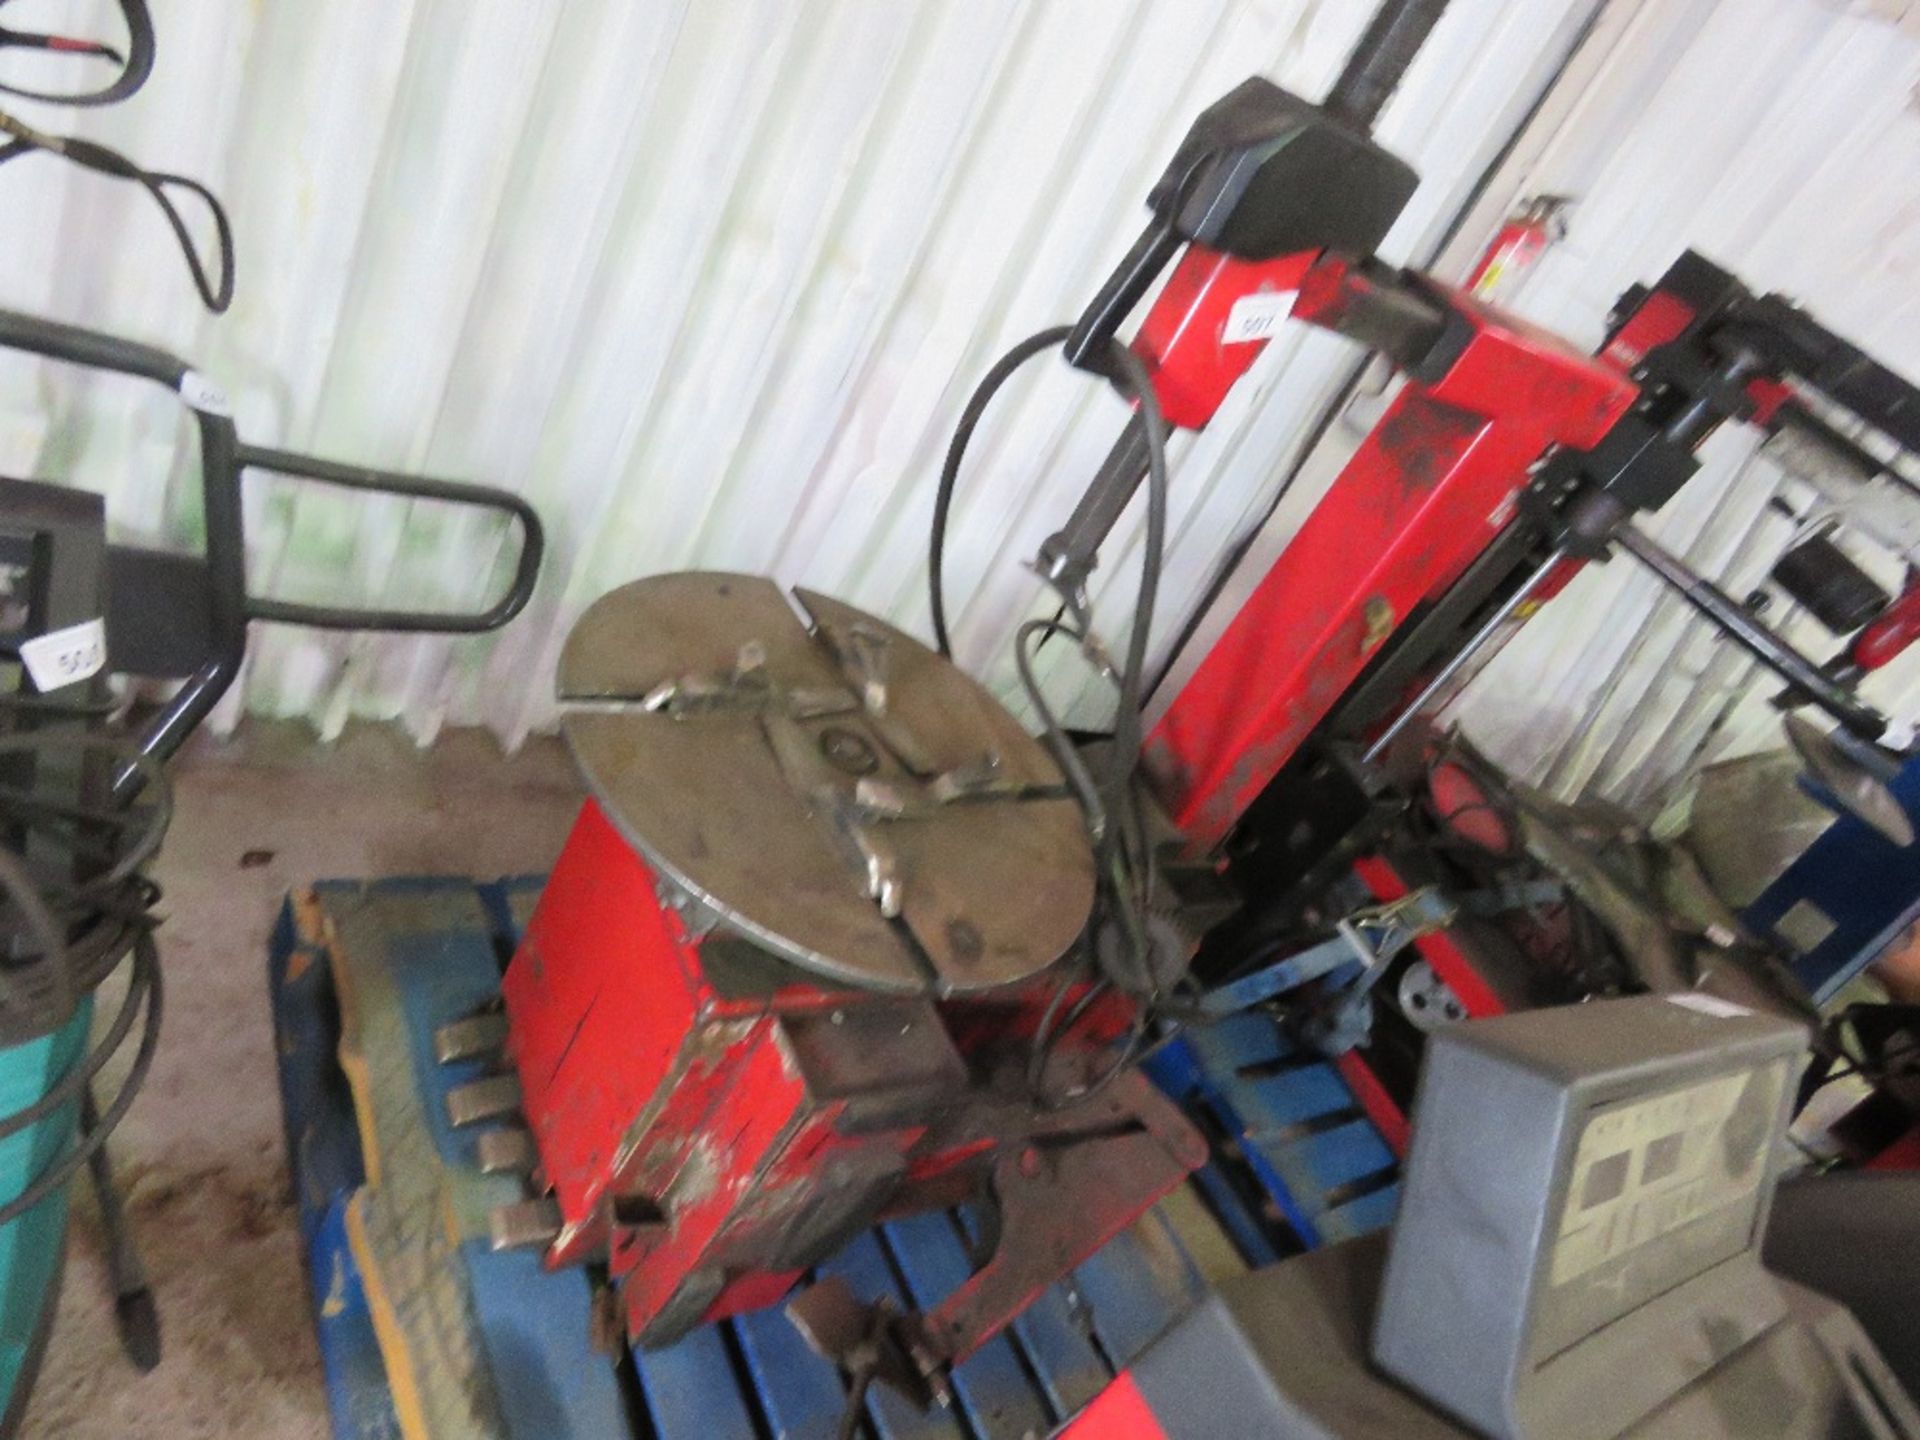 TYRE REMOVING MACHINE, 240VOLT POWERED. WORKING WHEN REMOVED FROM GARAGE LIQUIDATION. THIS LOT IS